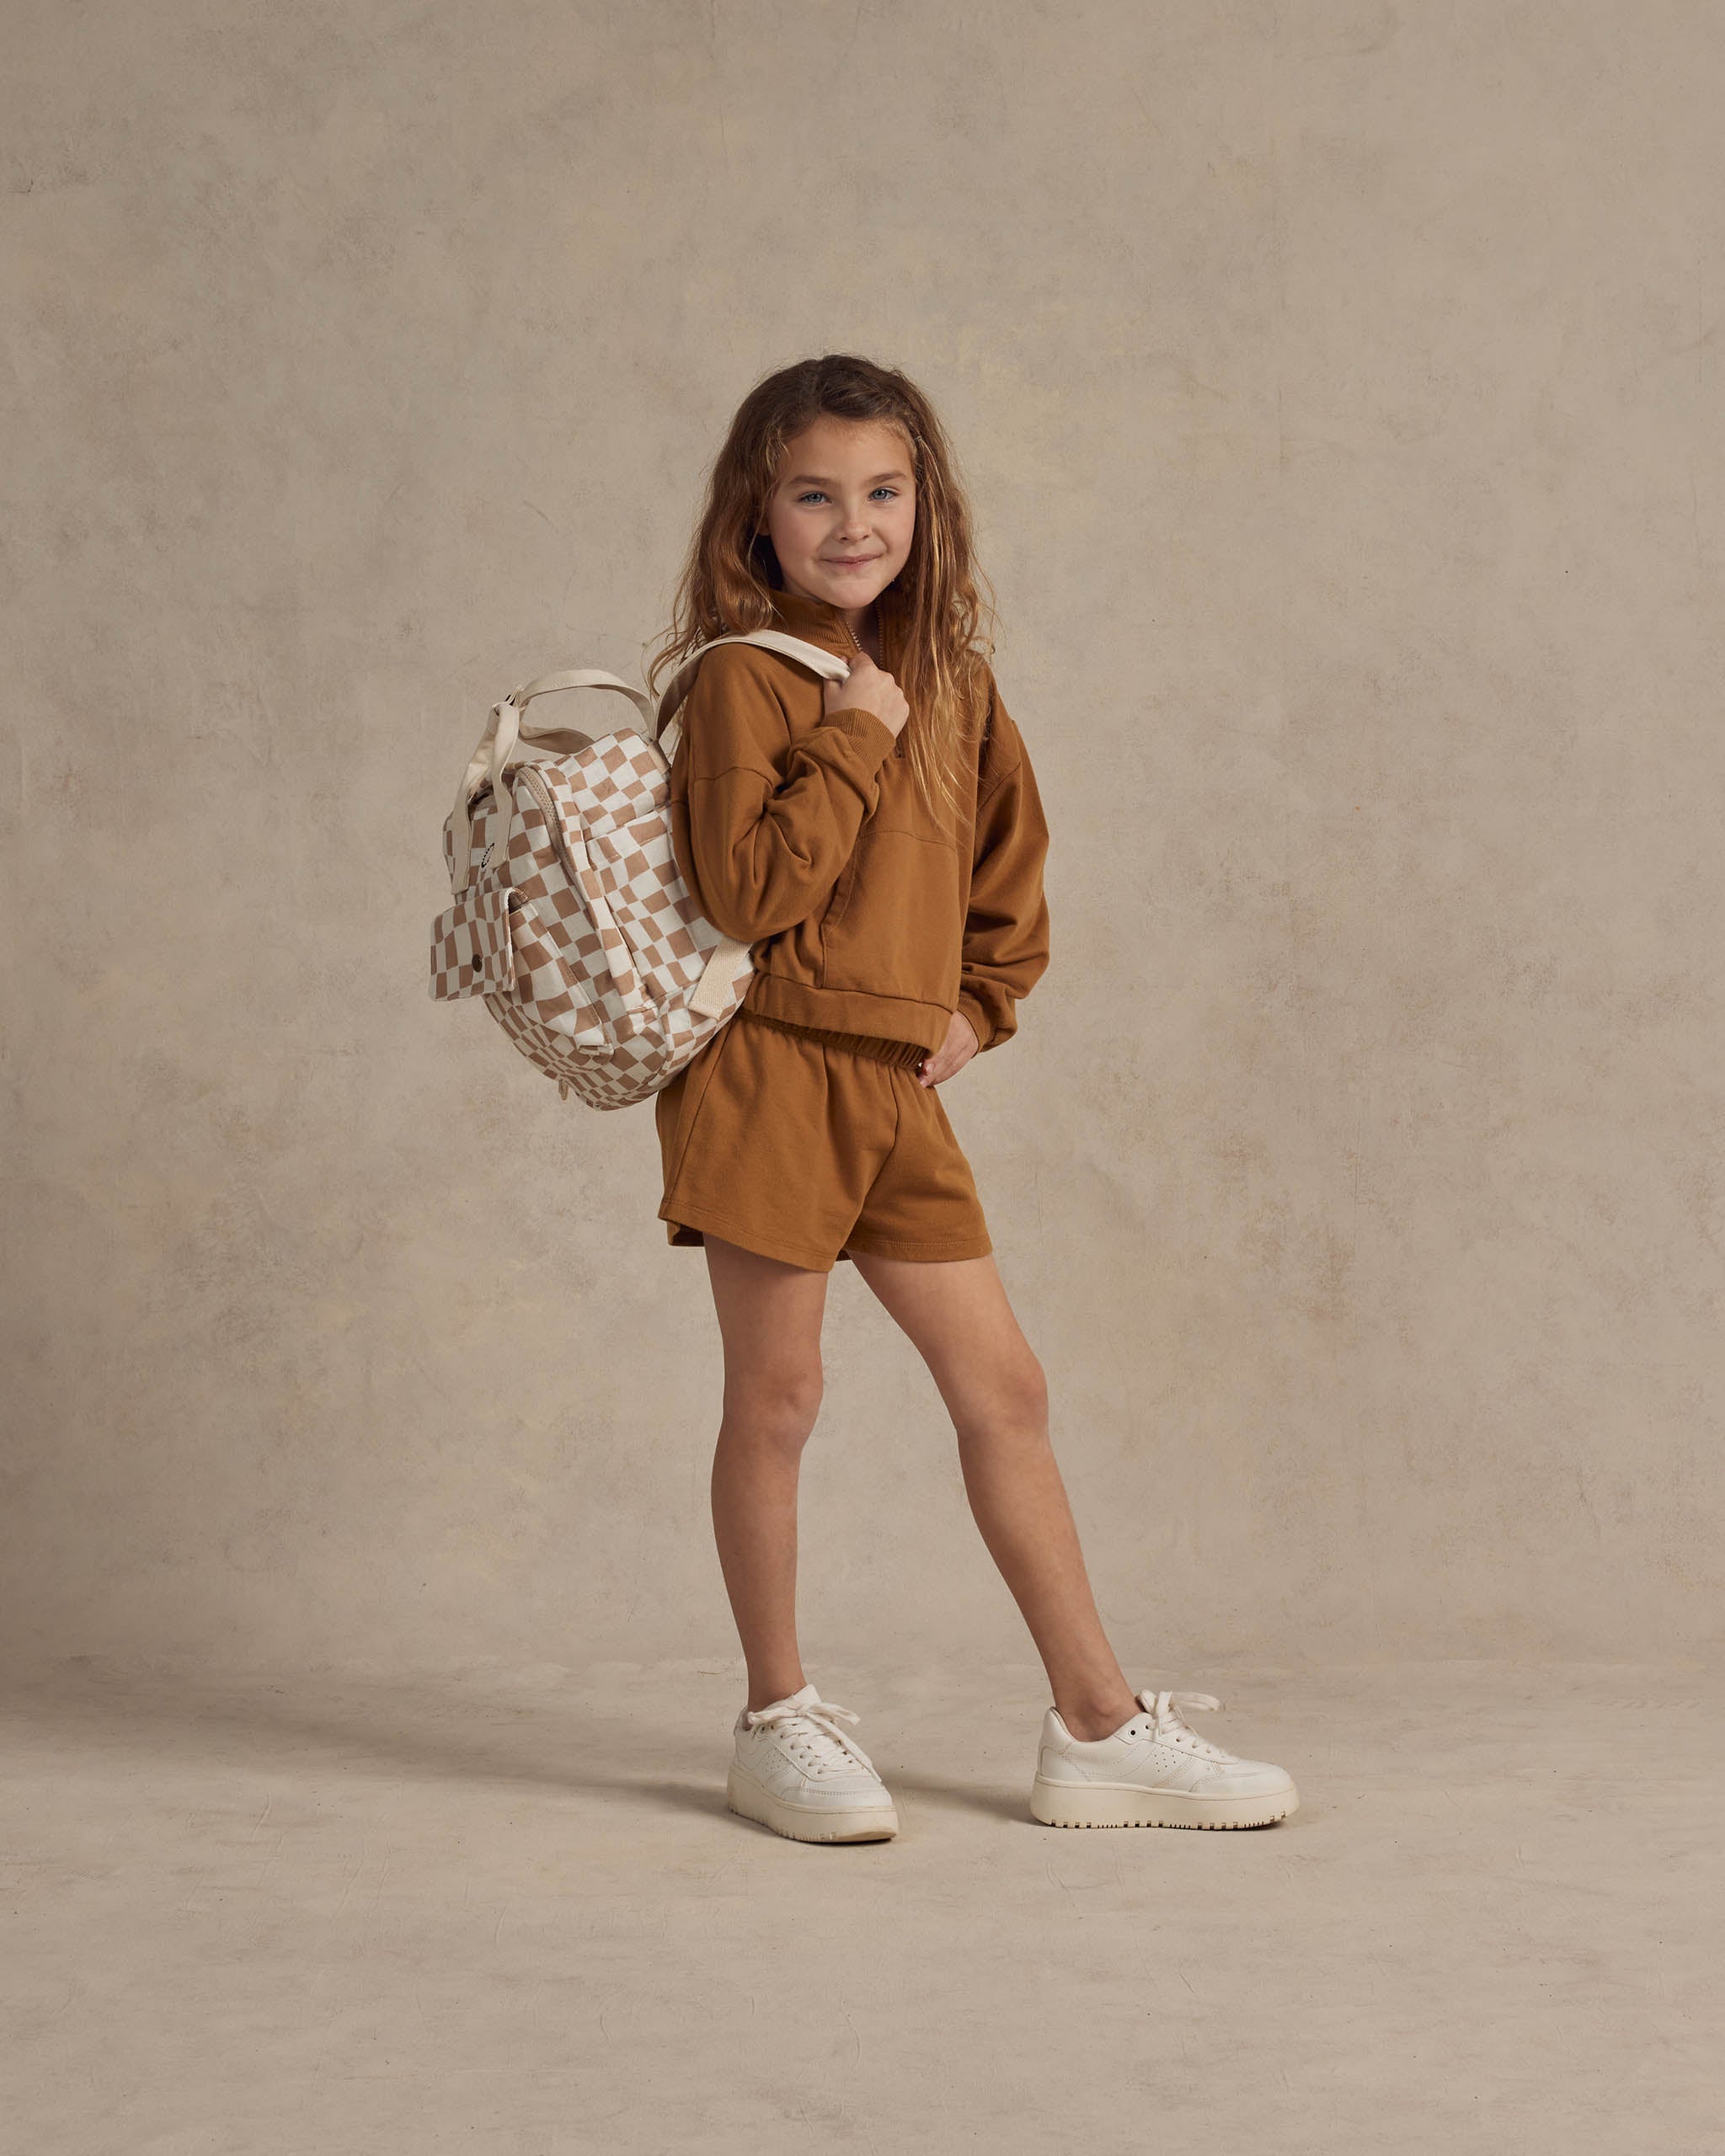 Mini Backpack || Sand Check - Rylee + Cru | Kids Clothes | Trendy Baby Clothes | Modern Infant Outfits |